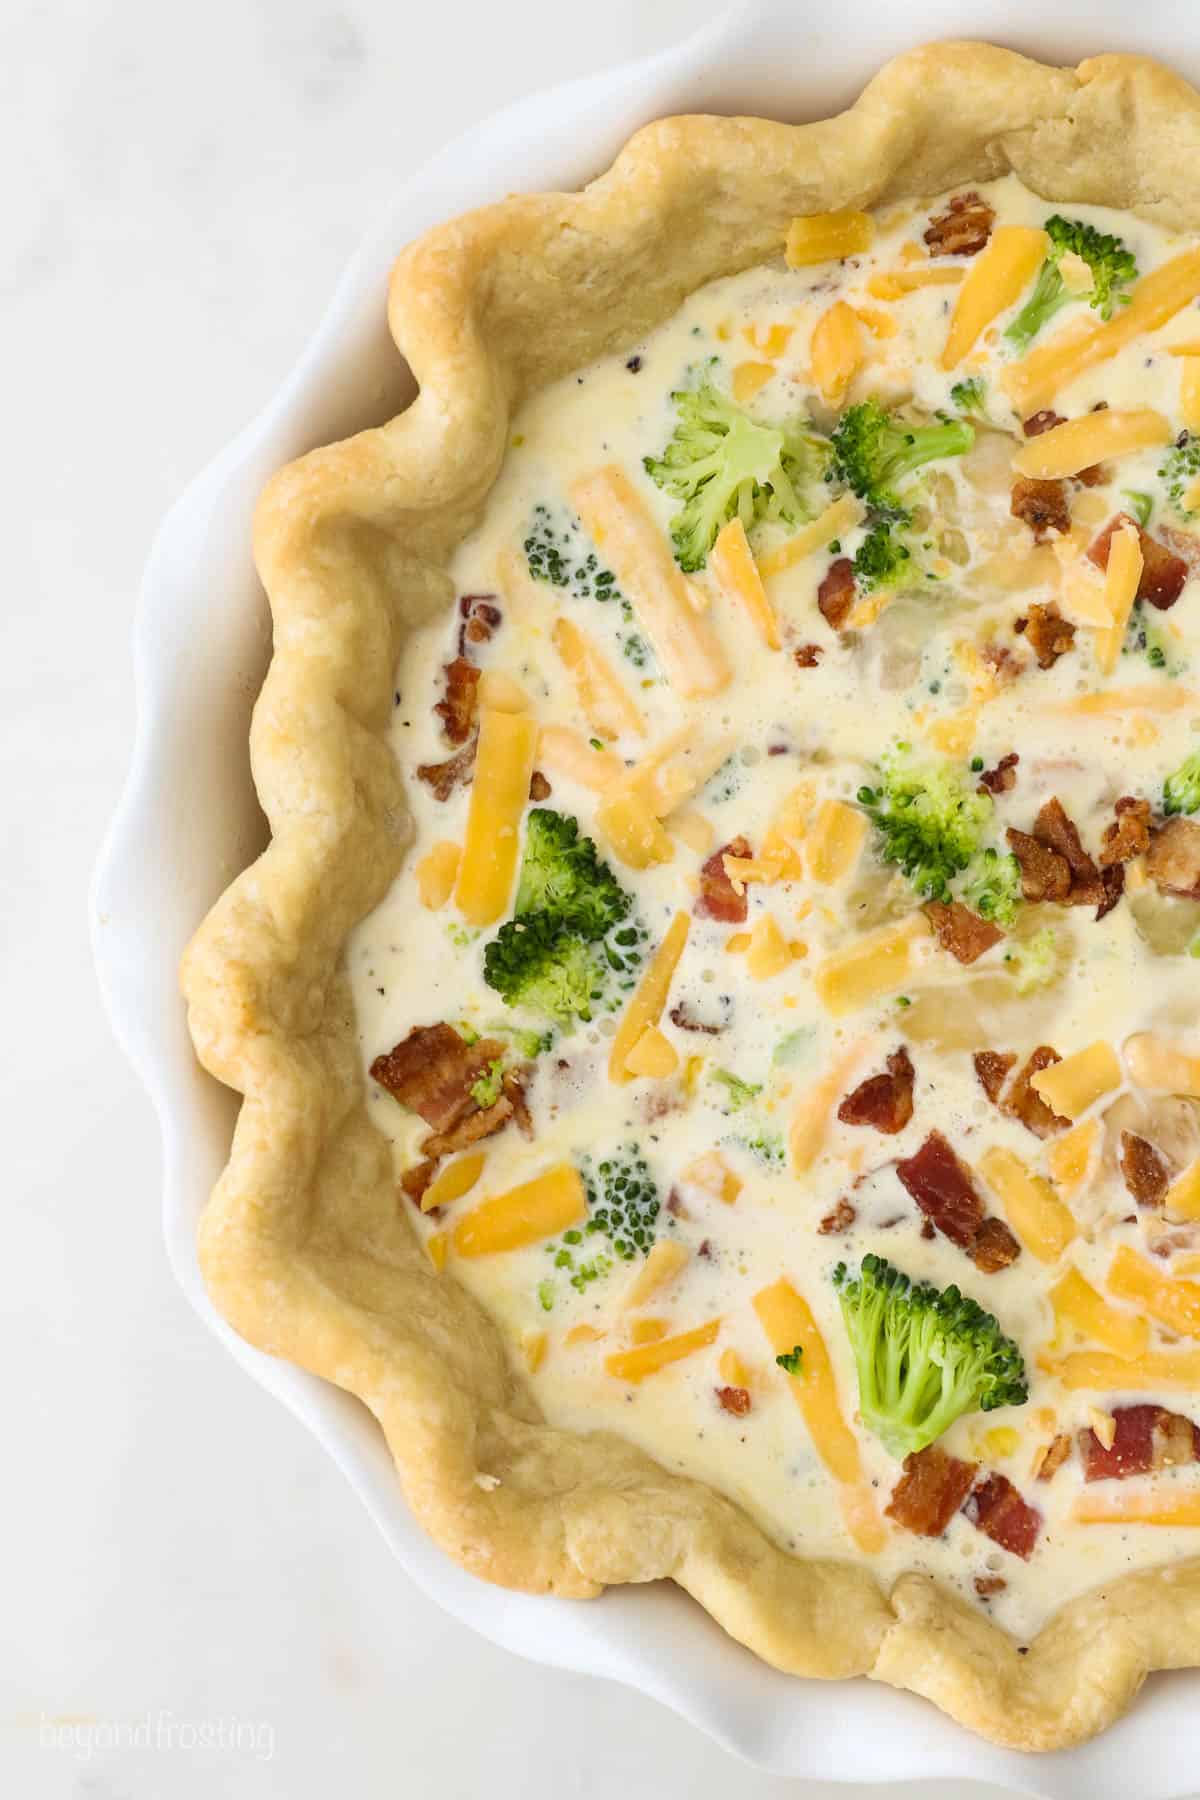 A pre-baked pie crust filled with cheese, broccoli, bacon and egg custard filling